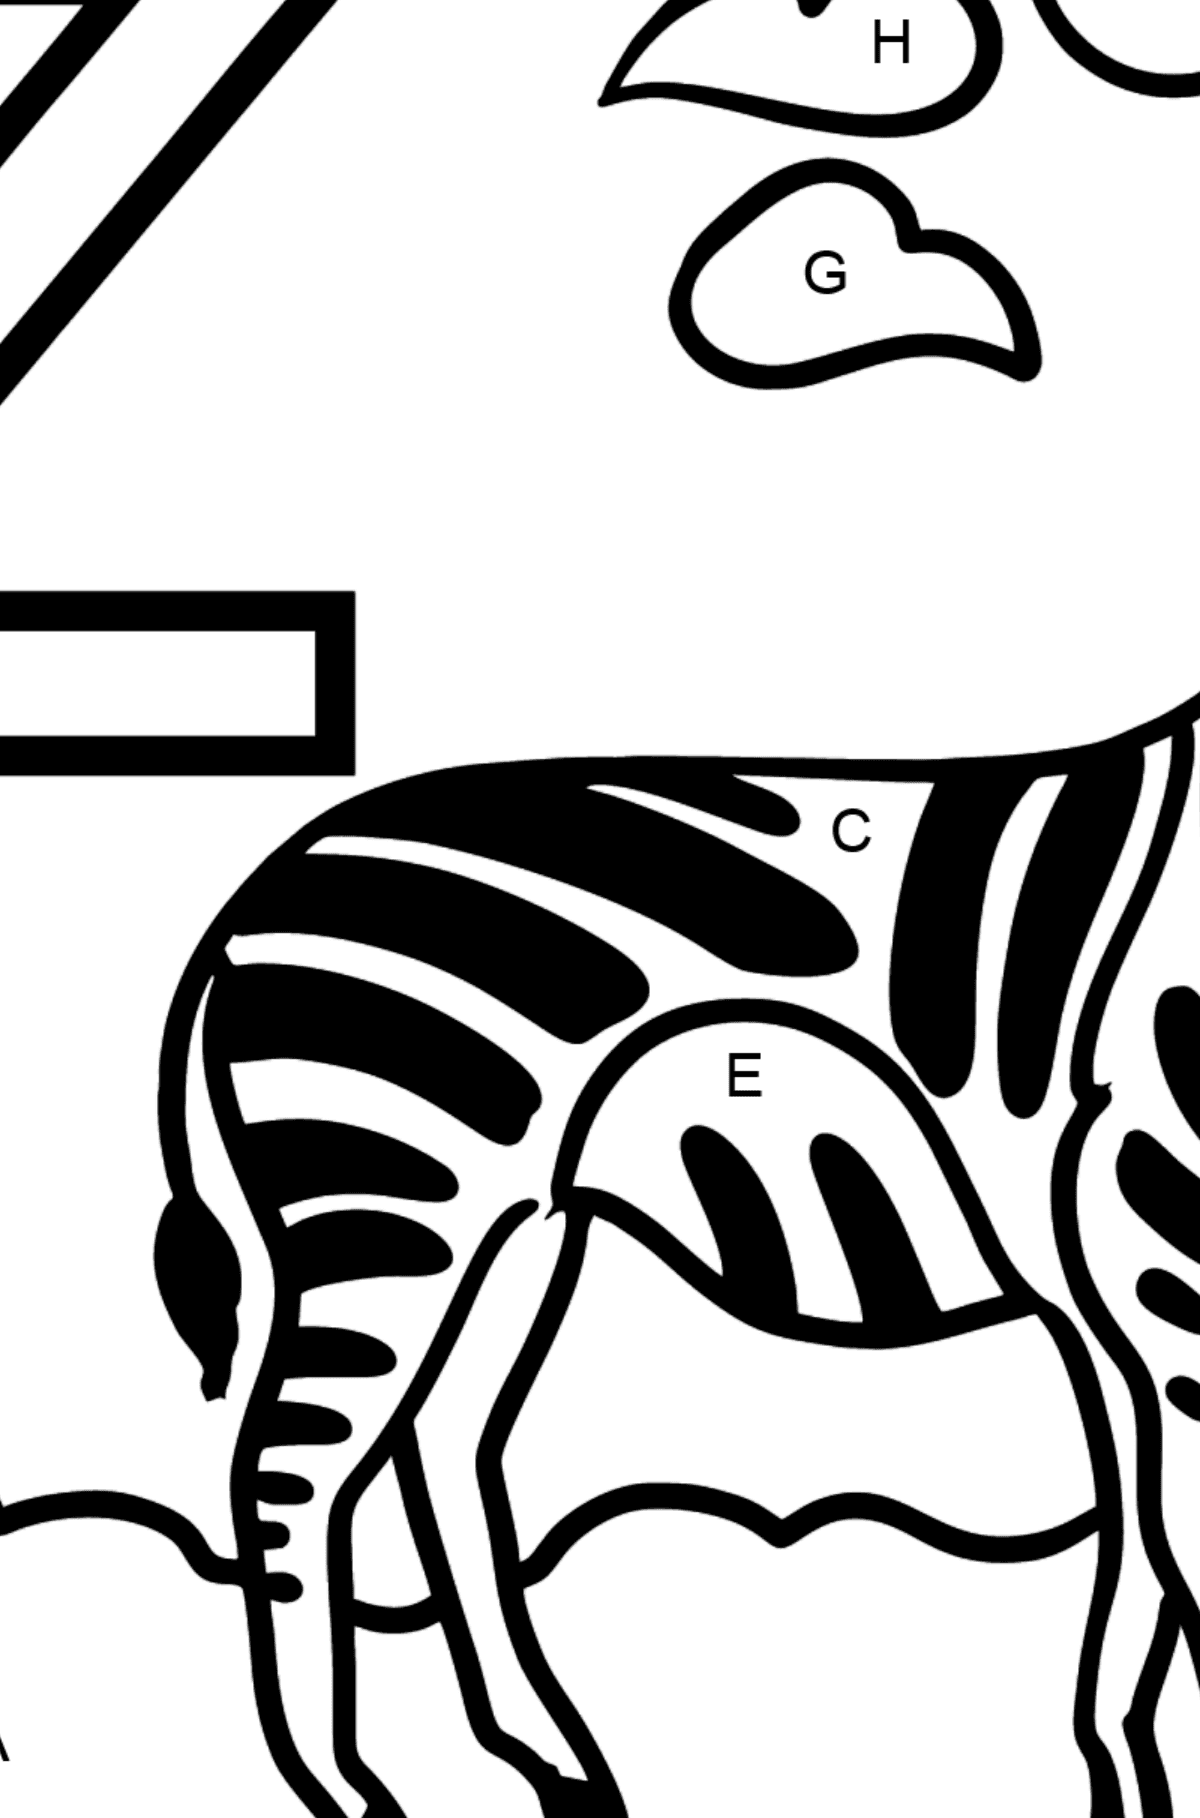 English Letter Z coloring pages - ZEBRA - Coloring by Letters for Kids